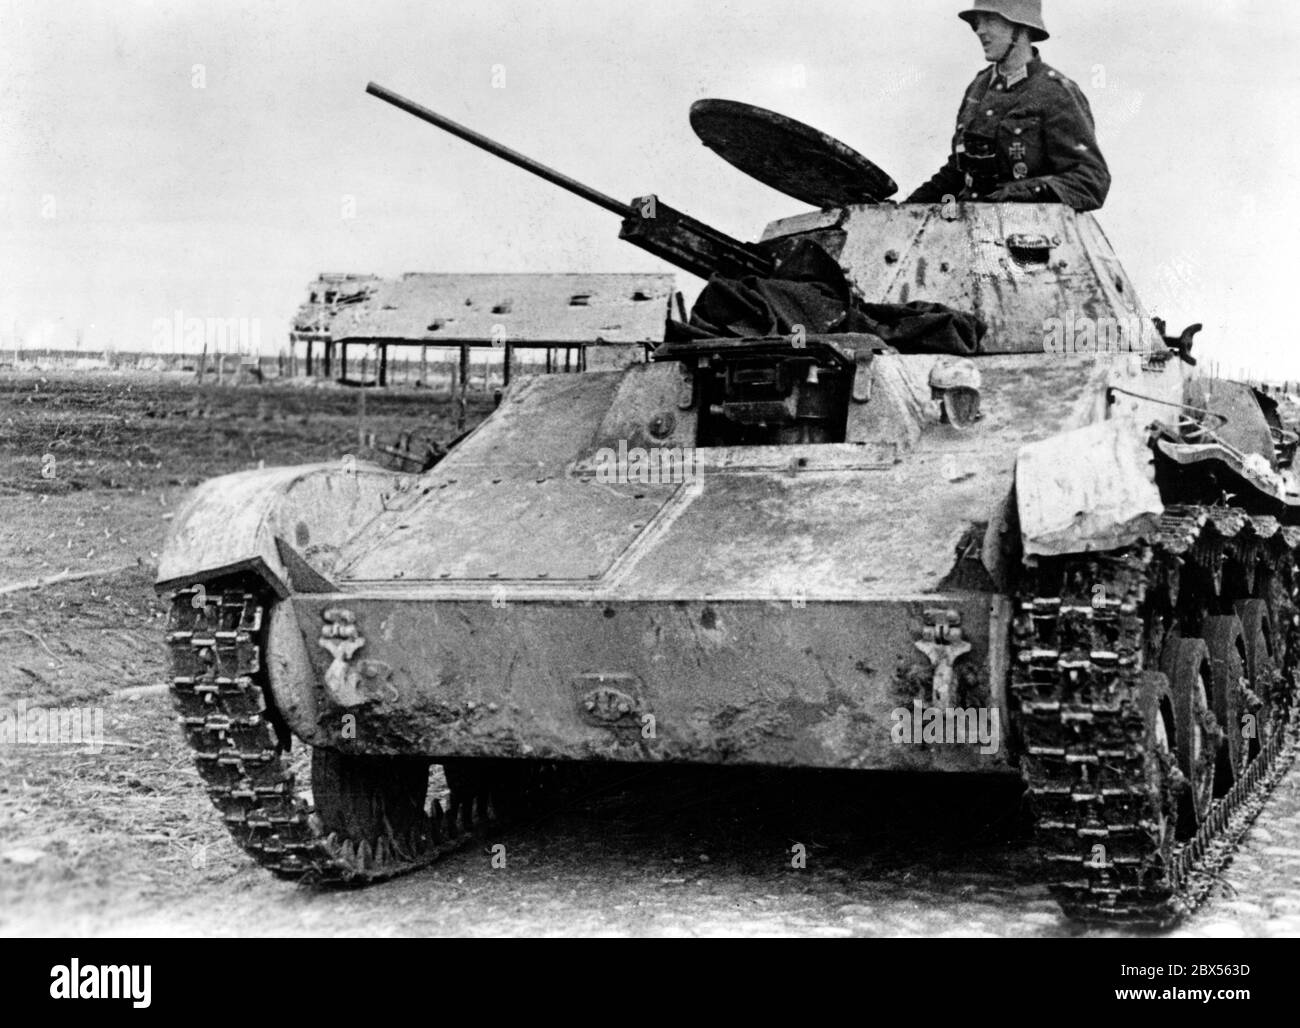 A soldier of the Wehrmacht on a captured T-60 tank. During the encirclement battle of Kholm the 'Kampfgruppe Scherer' successfully defended the city for 105 days. (A photo of the Propaganda Company (PK) by war correspondent Richard Muck, who flew into the pocket at the beginning of March). Stock Photo